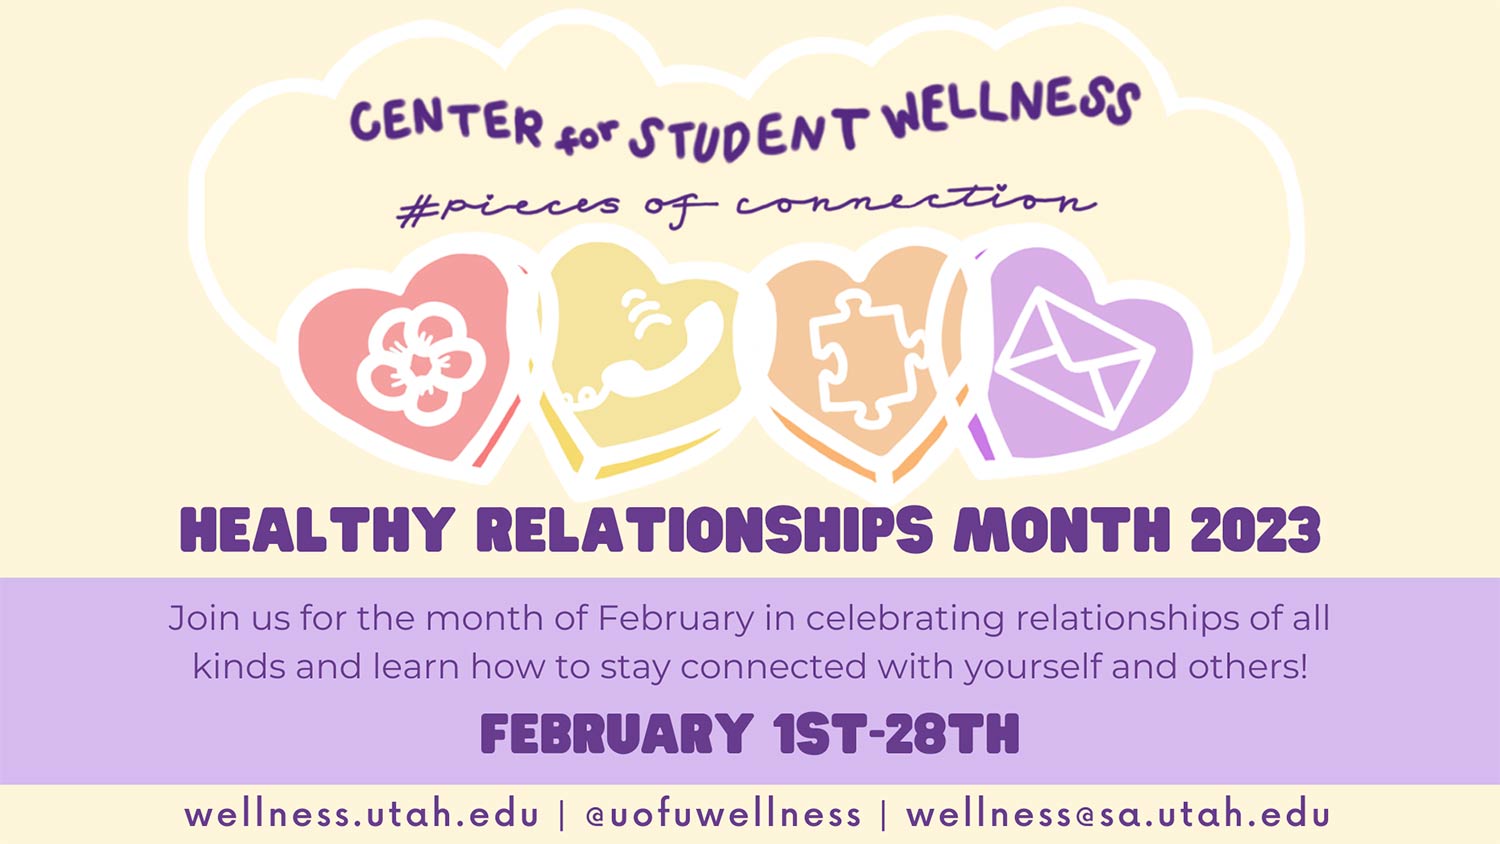 Healthy Relationships Month 2023 - February 1st - 28th